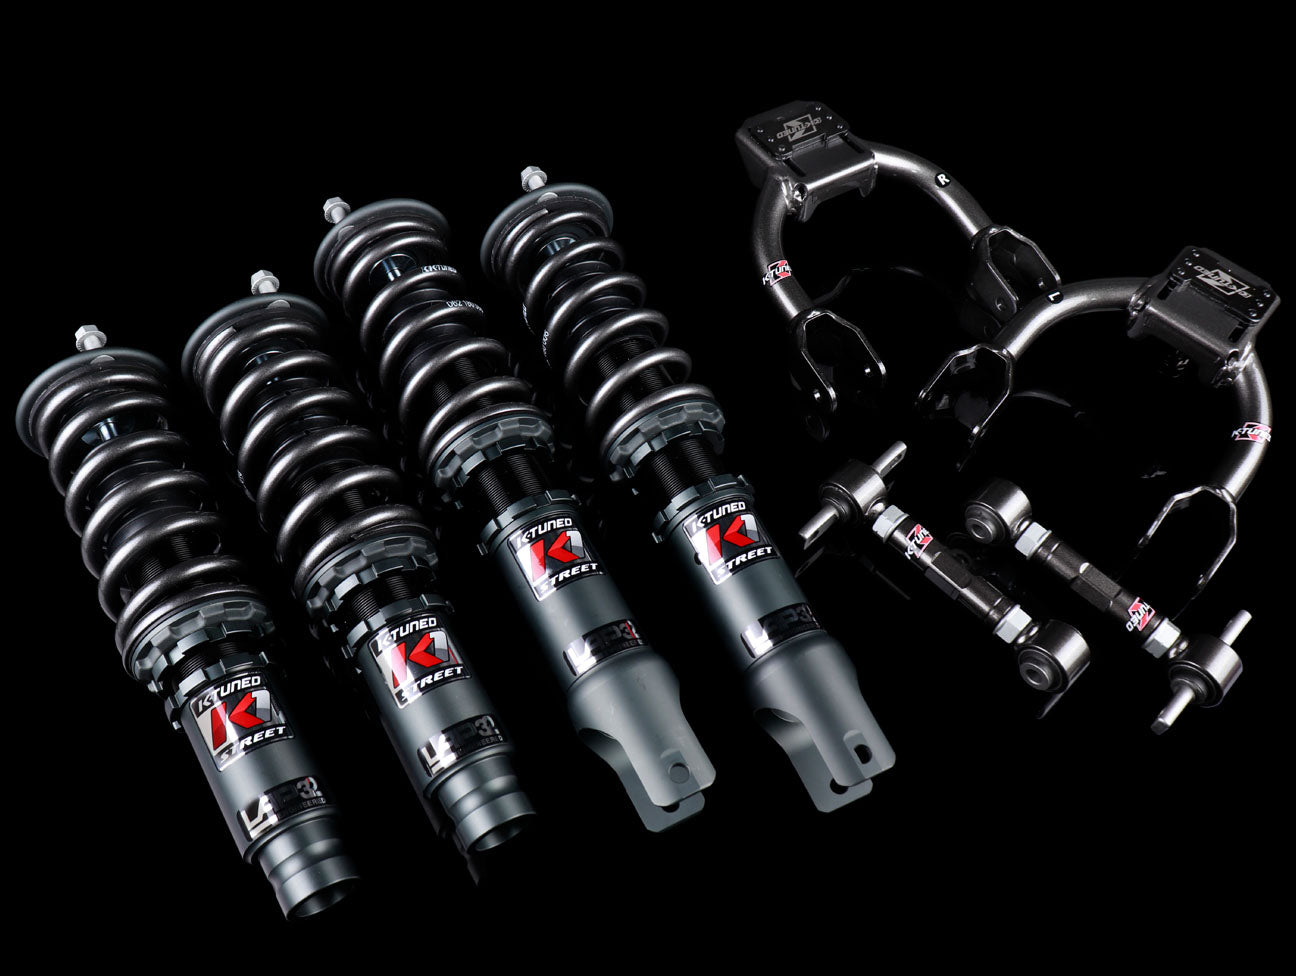 K-Tuned K1R Coilovers + Front & Rear Camber Kit - 92-00 Civic / 94-01 Integra